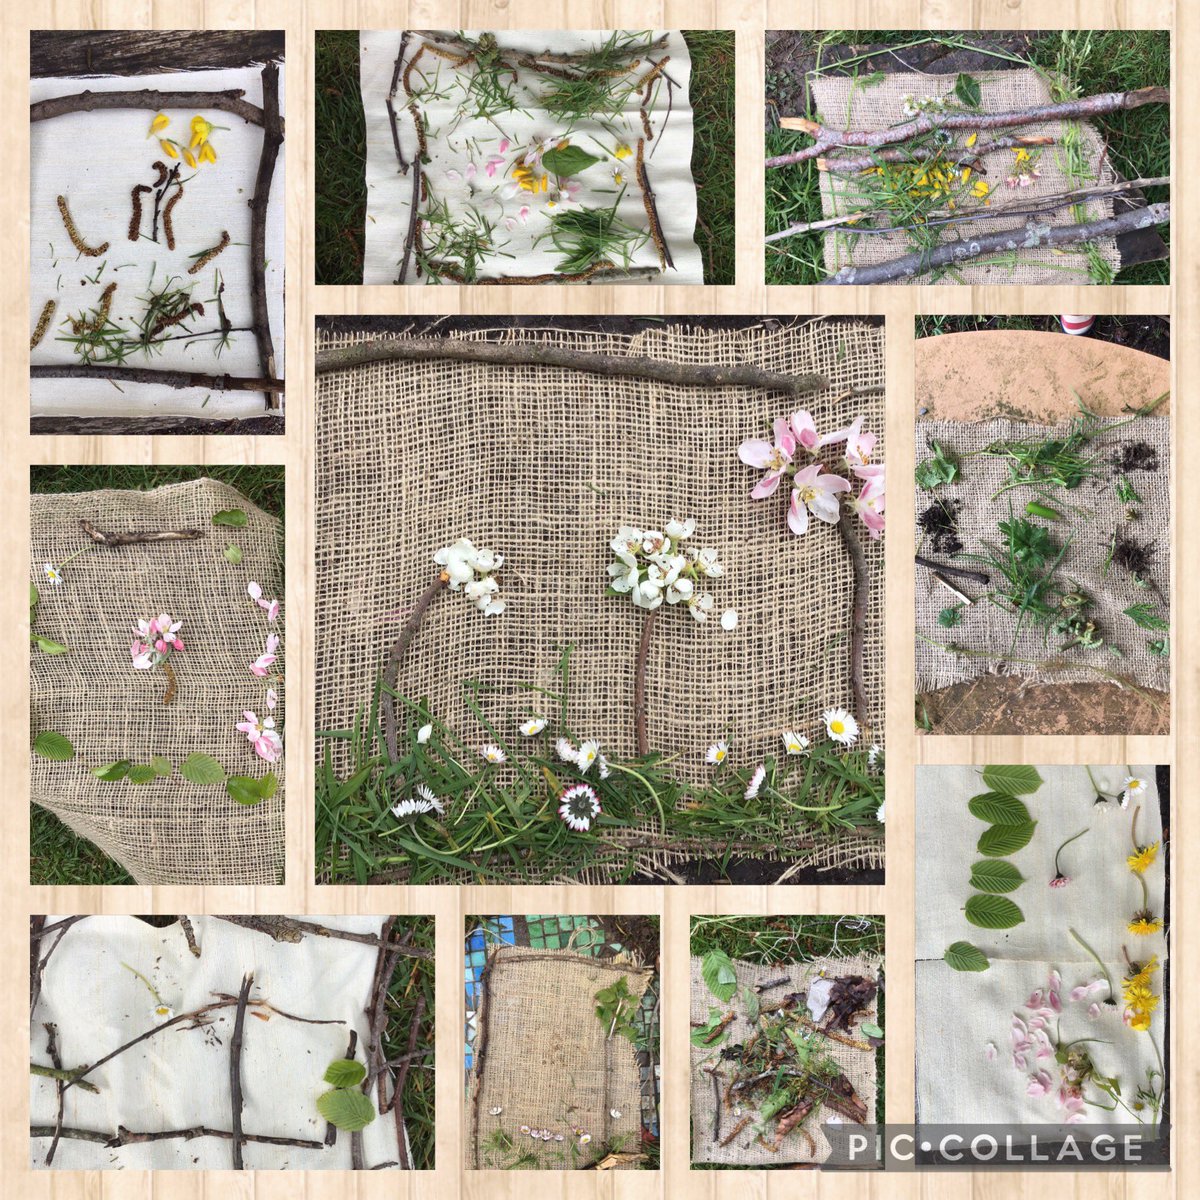 Our Welly Wednesday Nature Photo Frames we created with a partner. Lovely collaboration and creative ideas. #receptionclass #nurseryclass #earlyyears #ambitiouscapablelearners #enterprisingcreativecontributors @_OLW_ @SychdynSchool